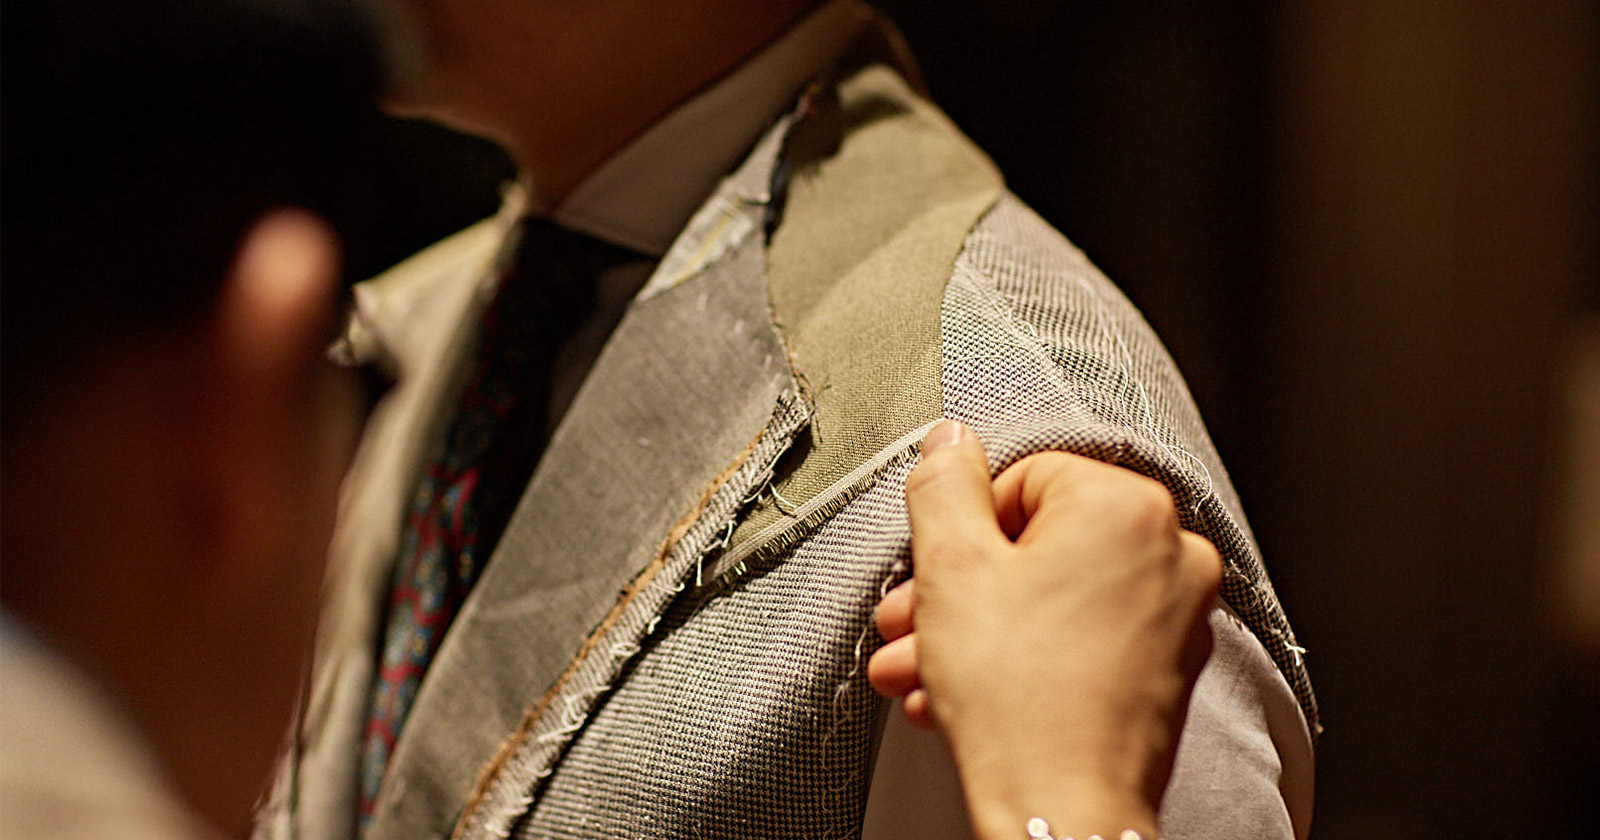 TIPS IN BUYING YOUR FIRST BESPOKE SUIT